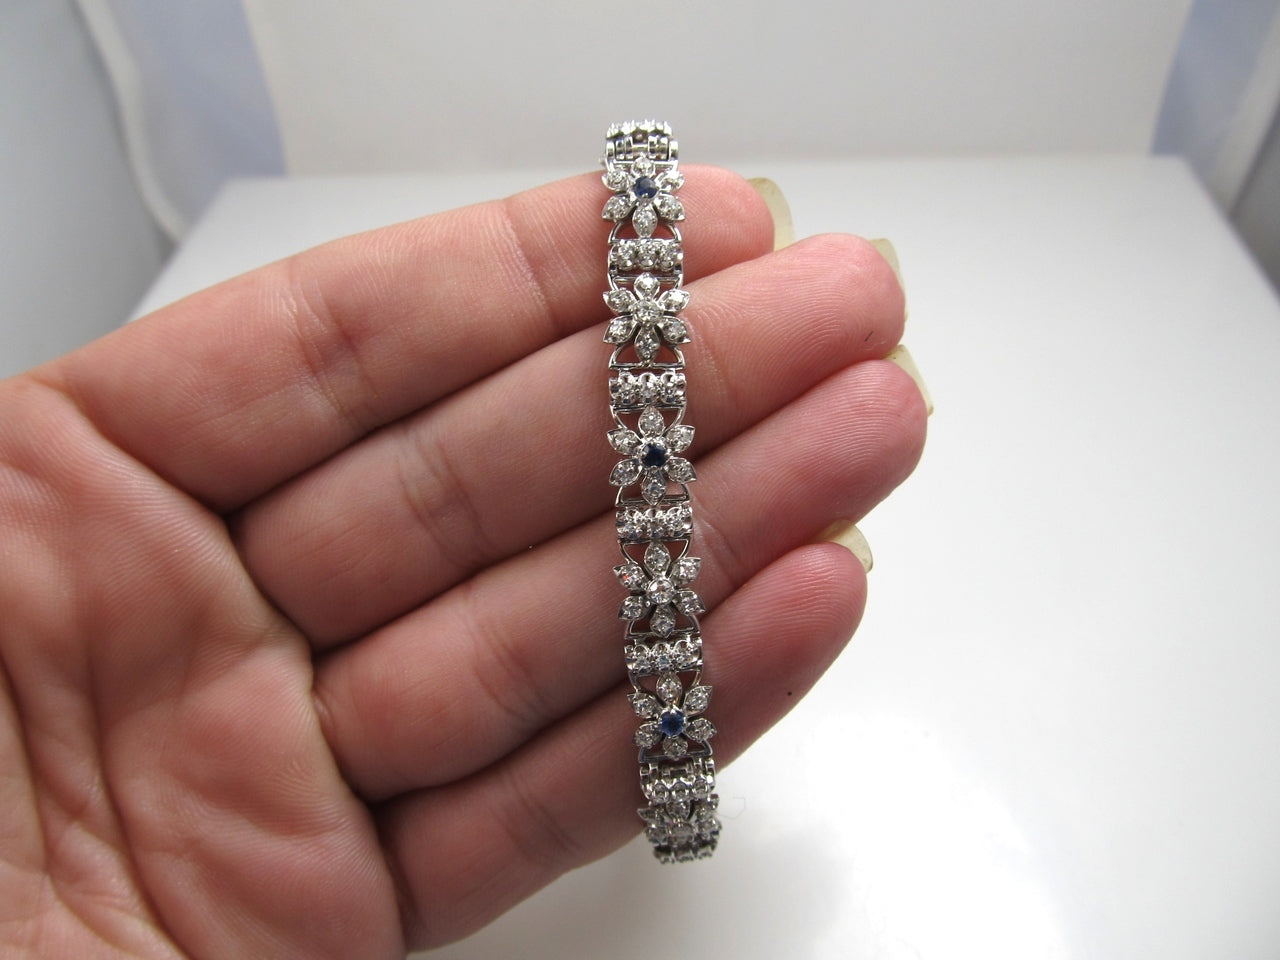 Jabel 18k White Gold Bracelet With 1.25cts In Diamonds, Sapphires. Circa 1940